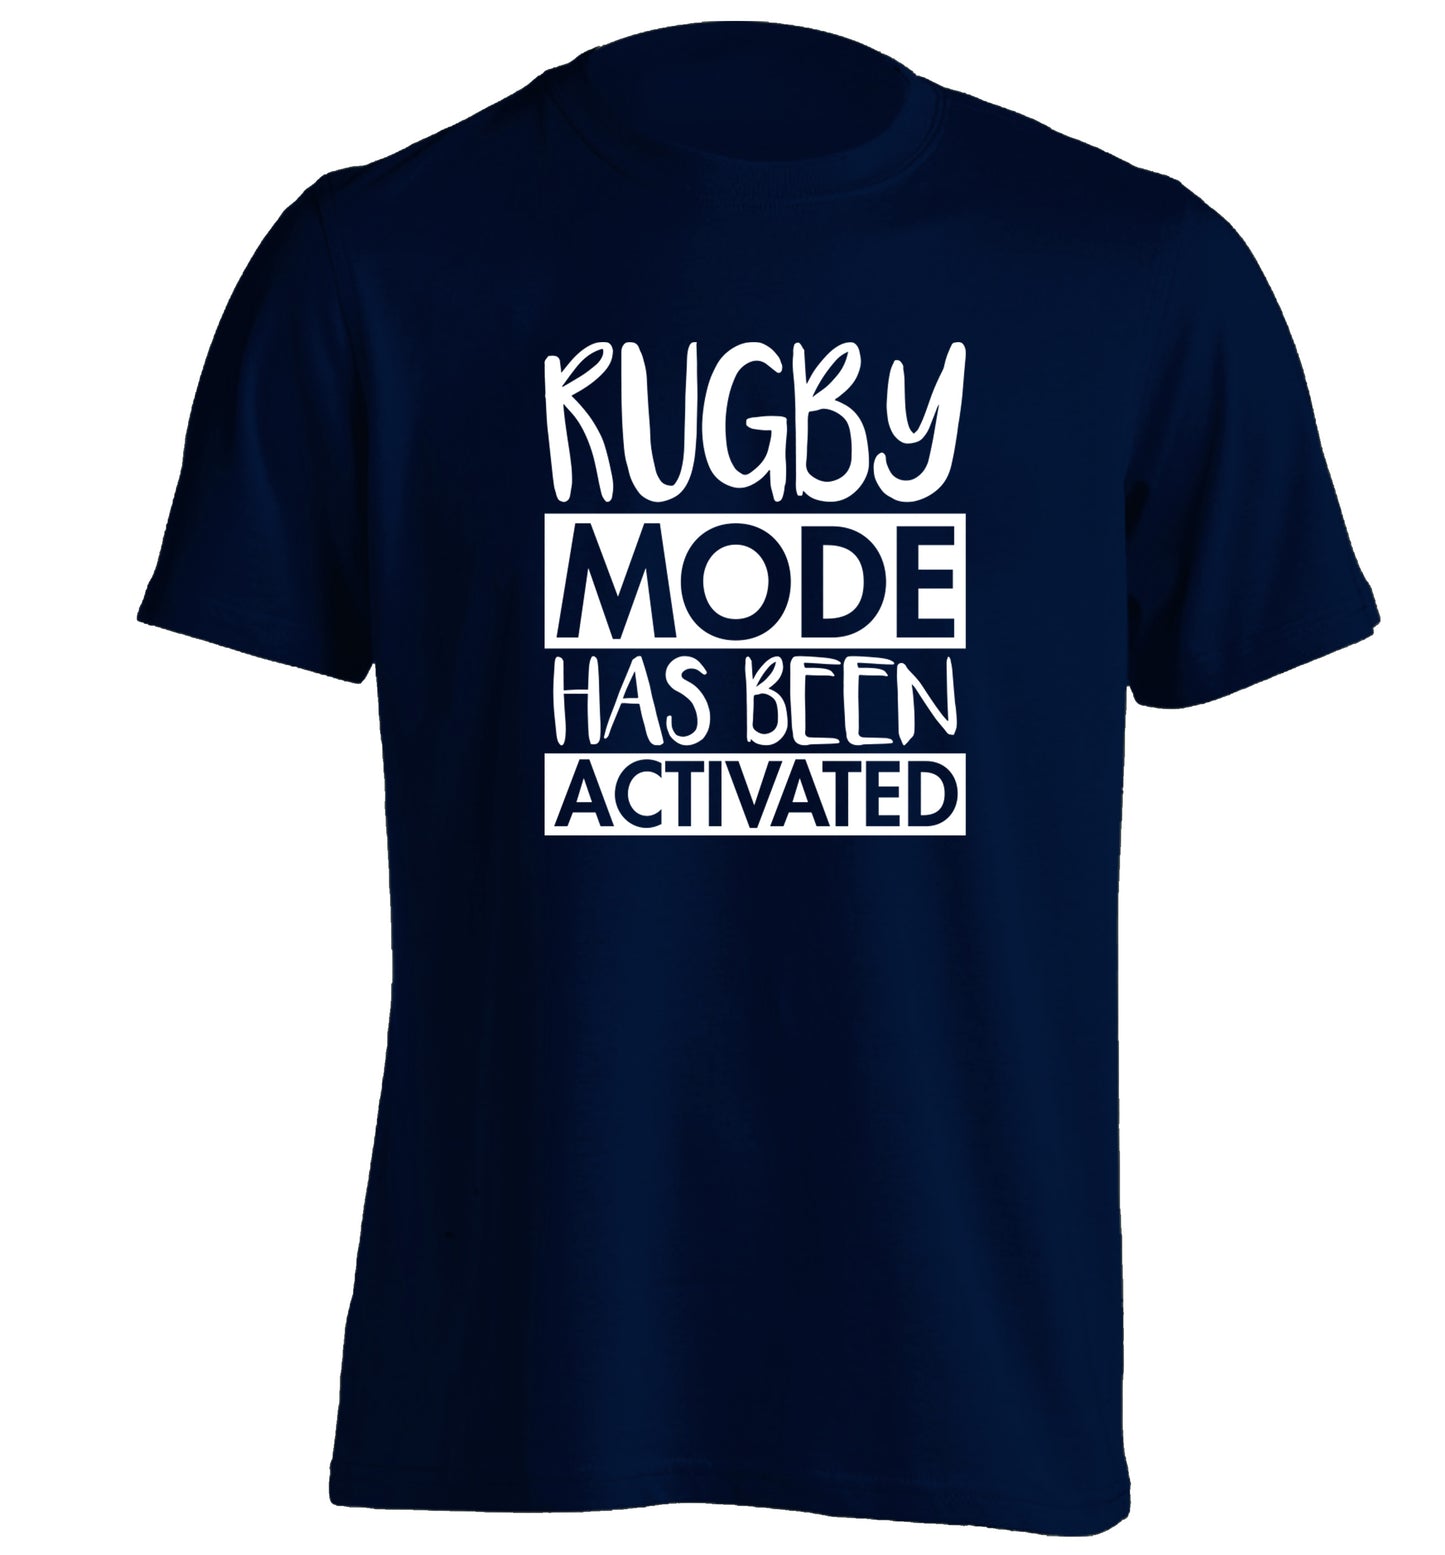 Rugby mode activated adults unisex navy Tshirt 2XL